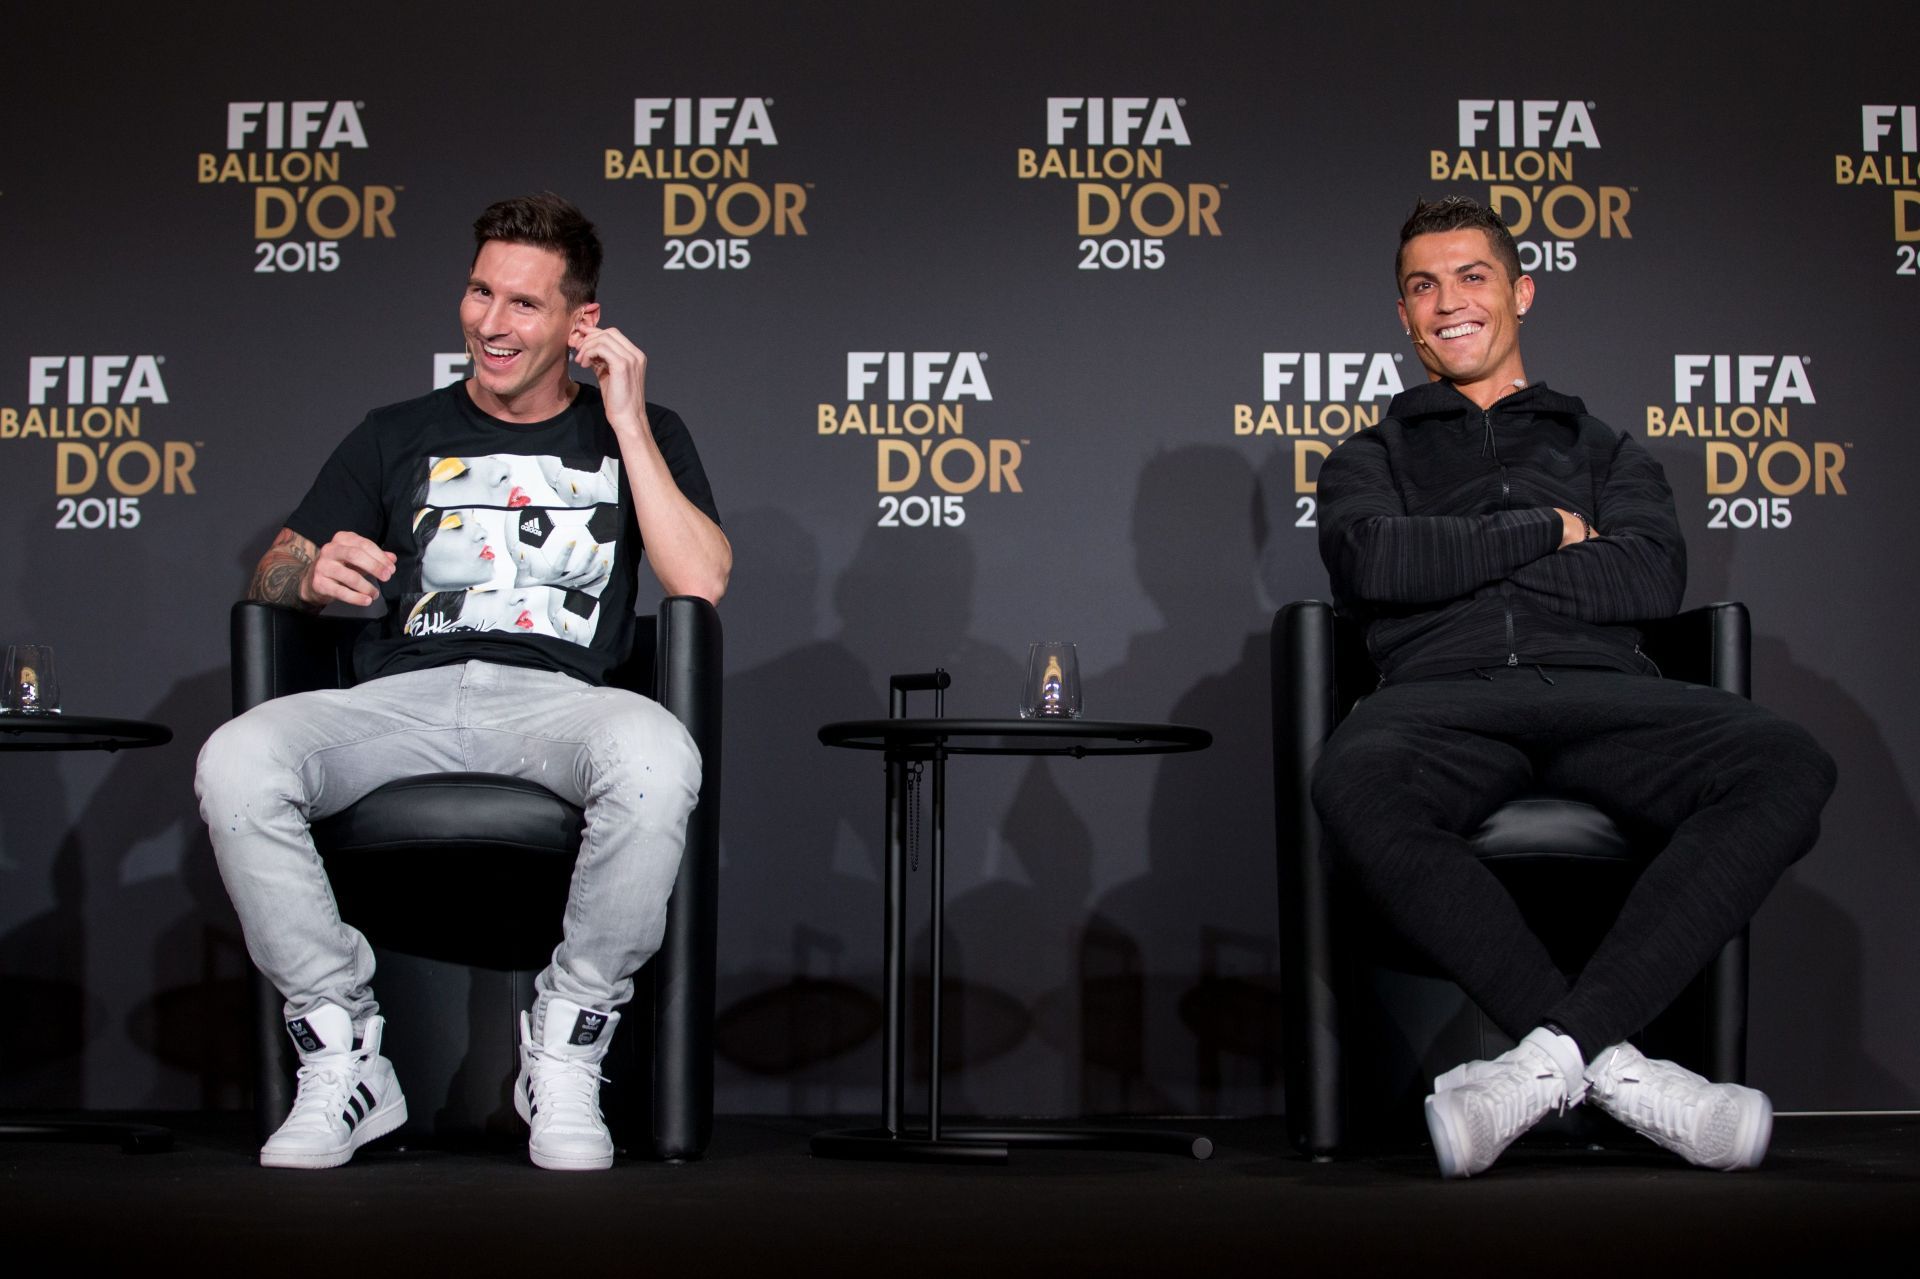 Who joins Lionel Messi and Cristiano Ronaldo on the list of legendary players who have never won the FIFA World Cup?